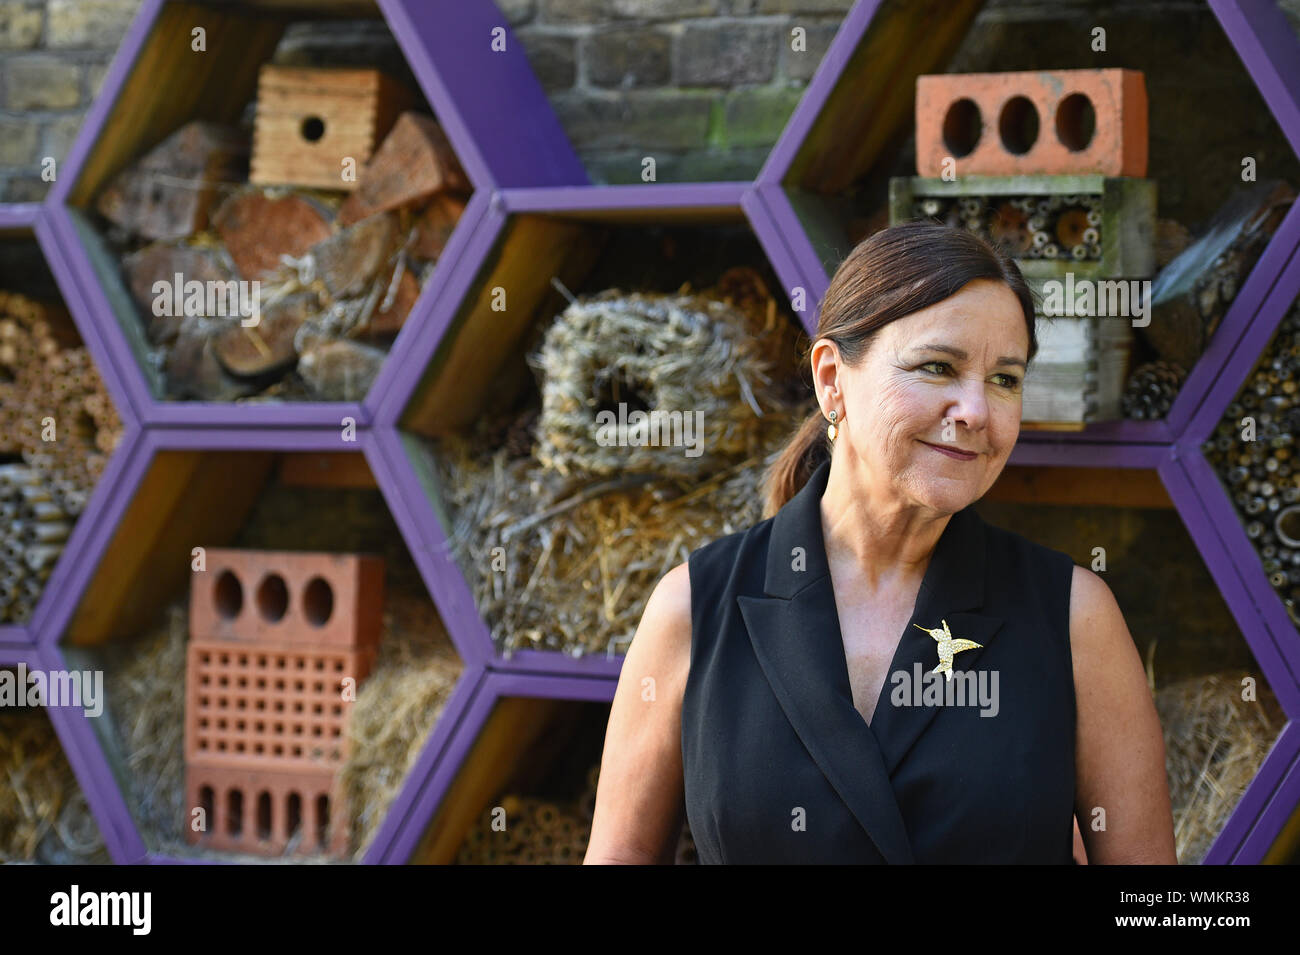 Second Lady Karen Pence, wife of Vice President Mike Pence, during a visit to the Bee Terrace at St Ermin's Hotel in Westminster, London. Stock Photo